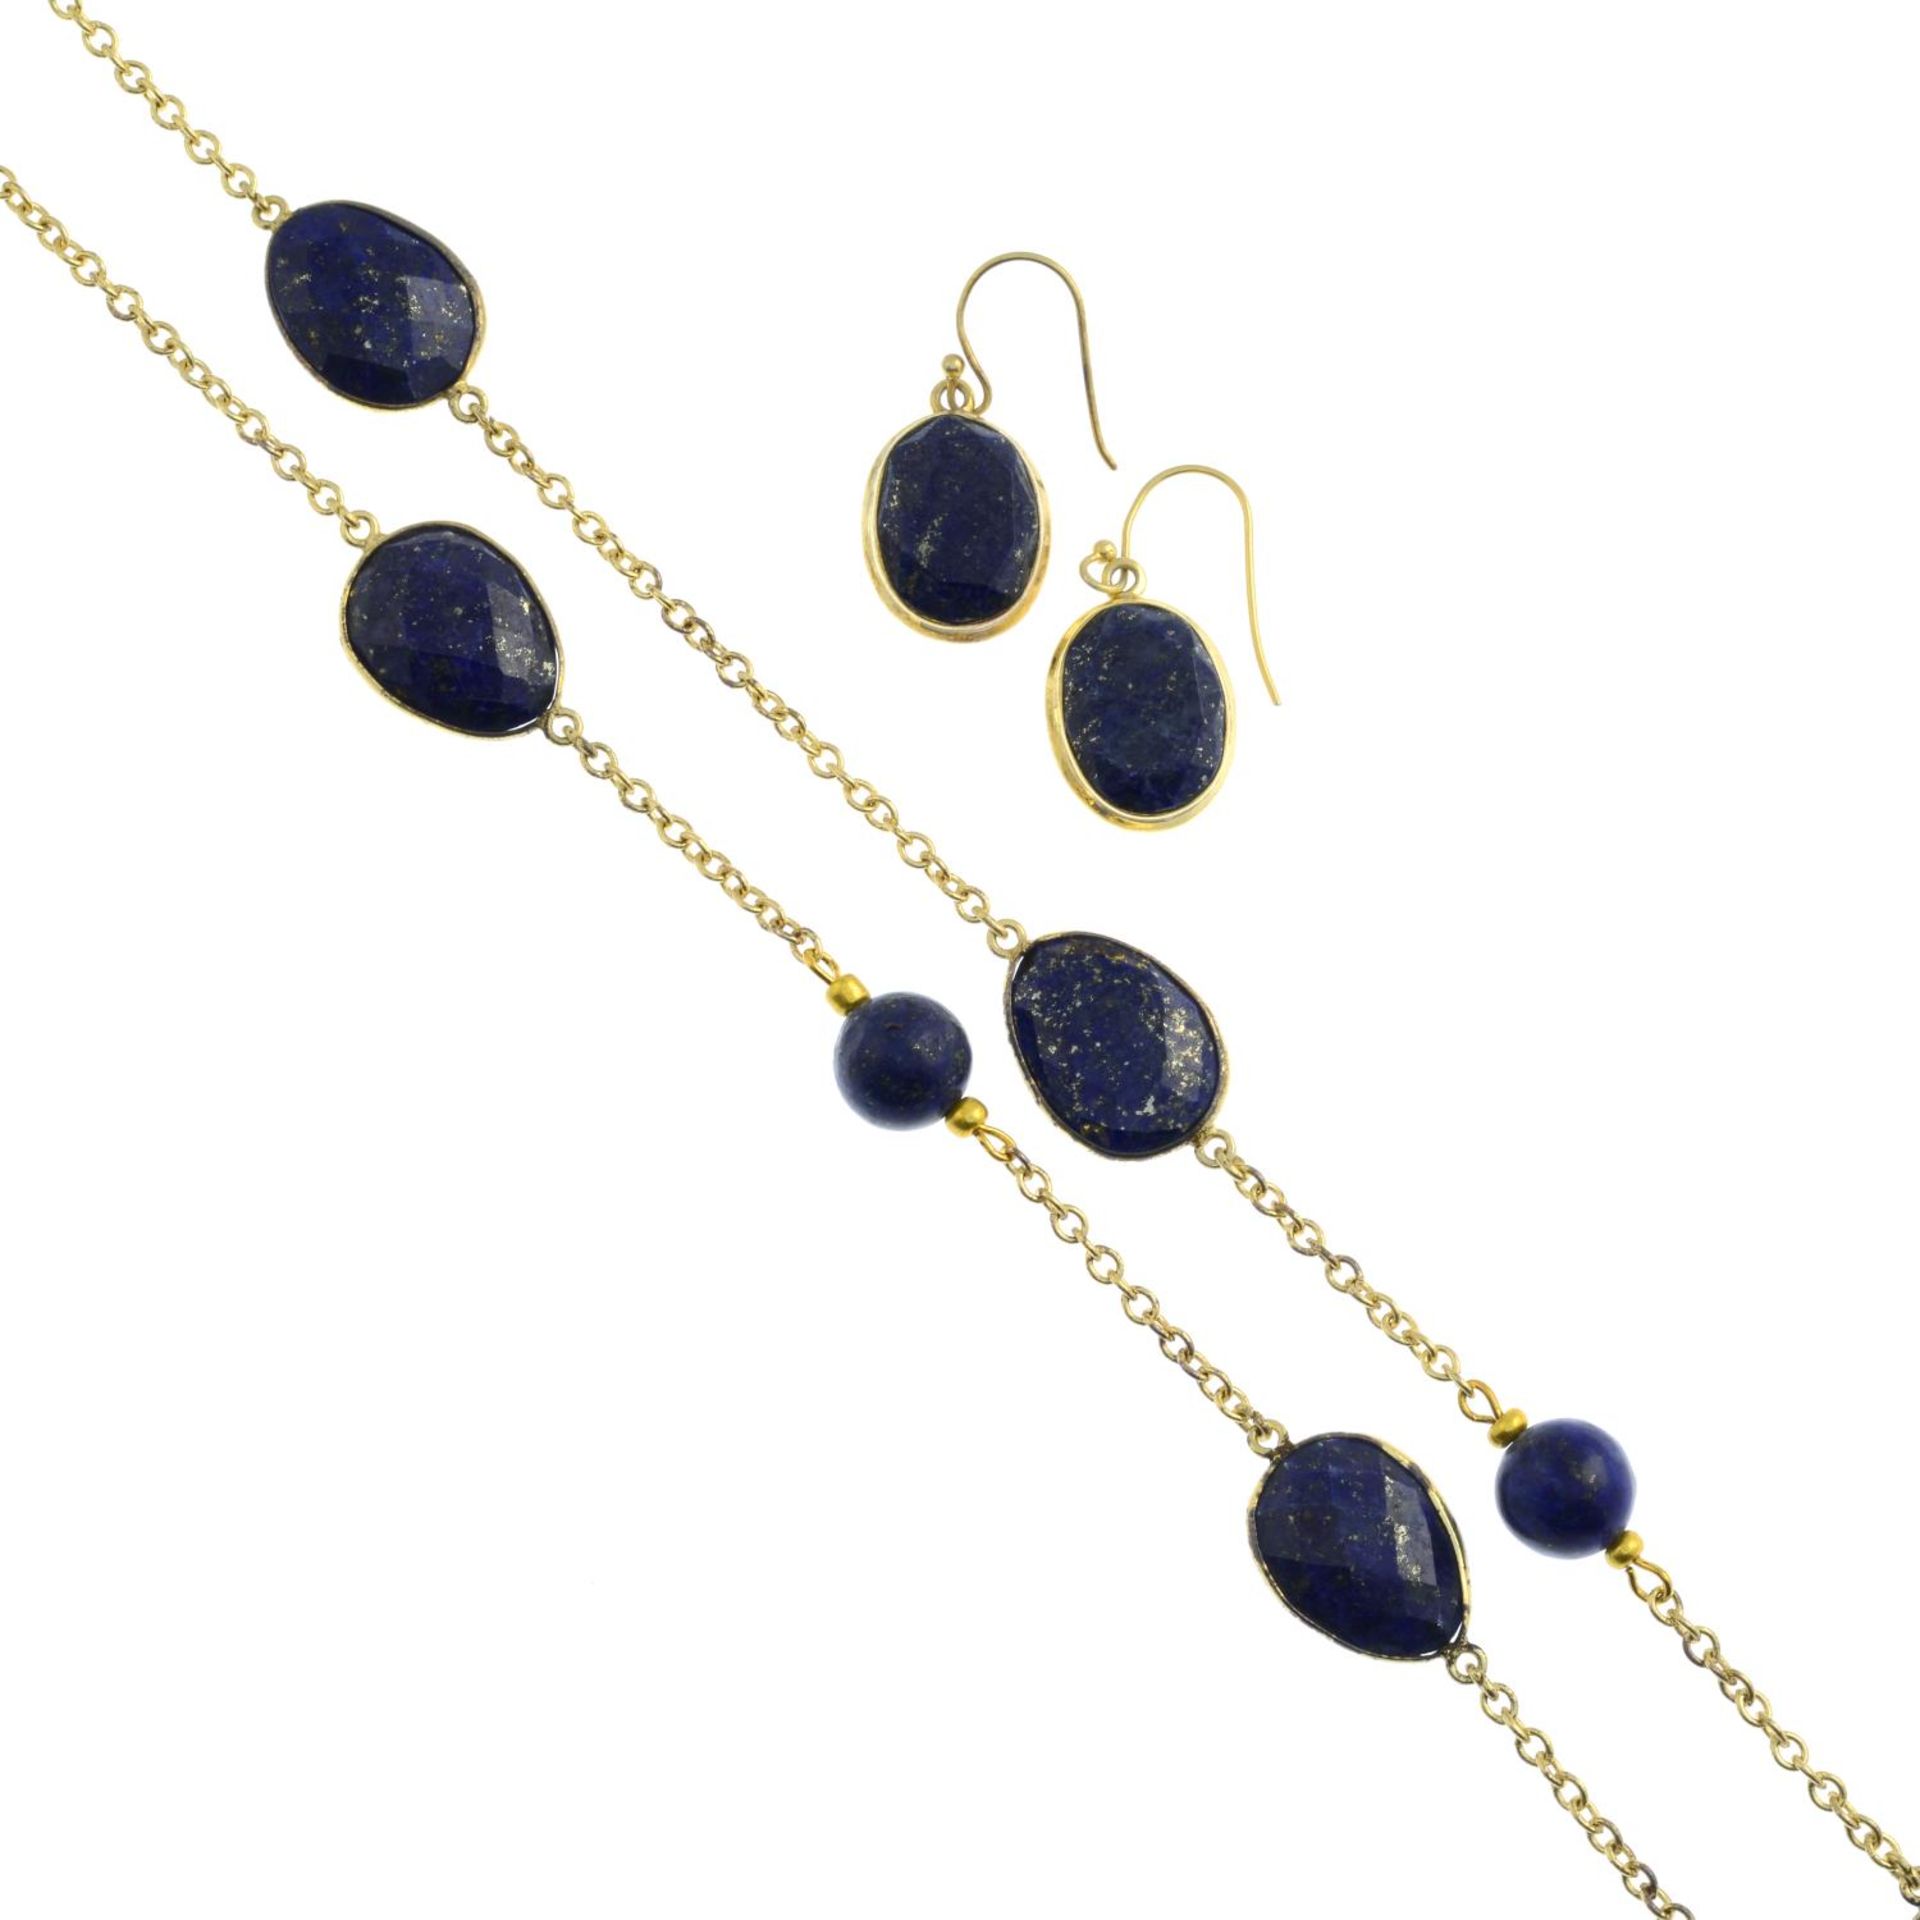 A lapis lazuli necklace and earrings.Earrings stamped 925.Length of necklace 124cms.